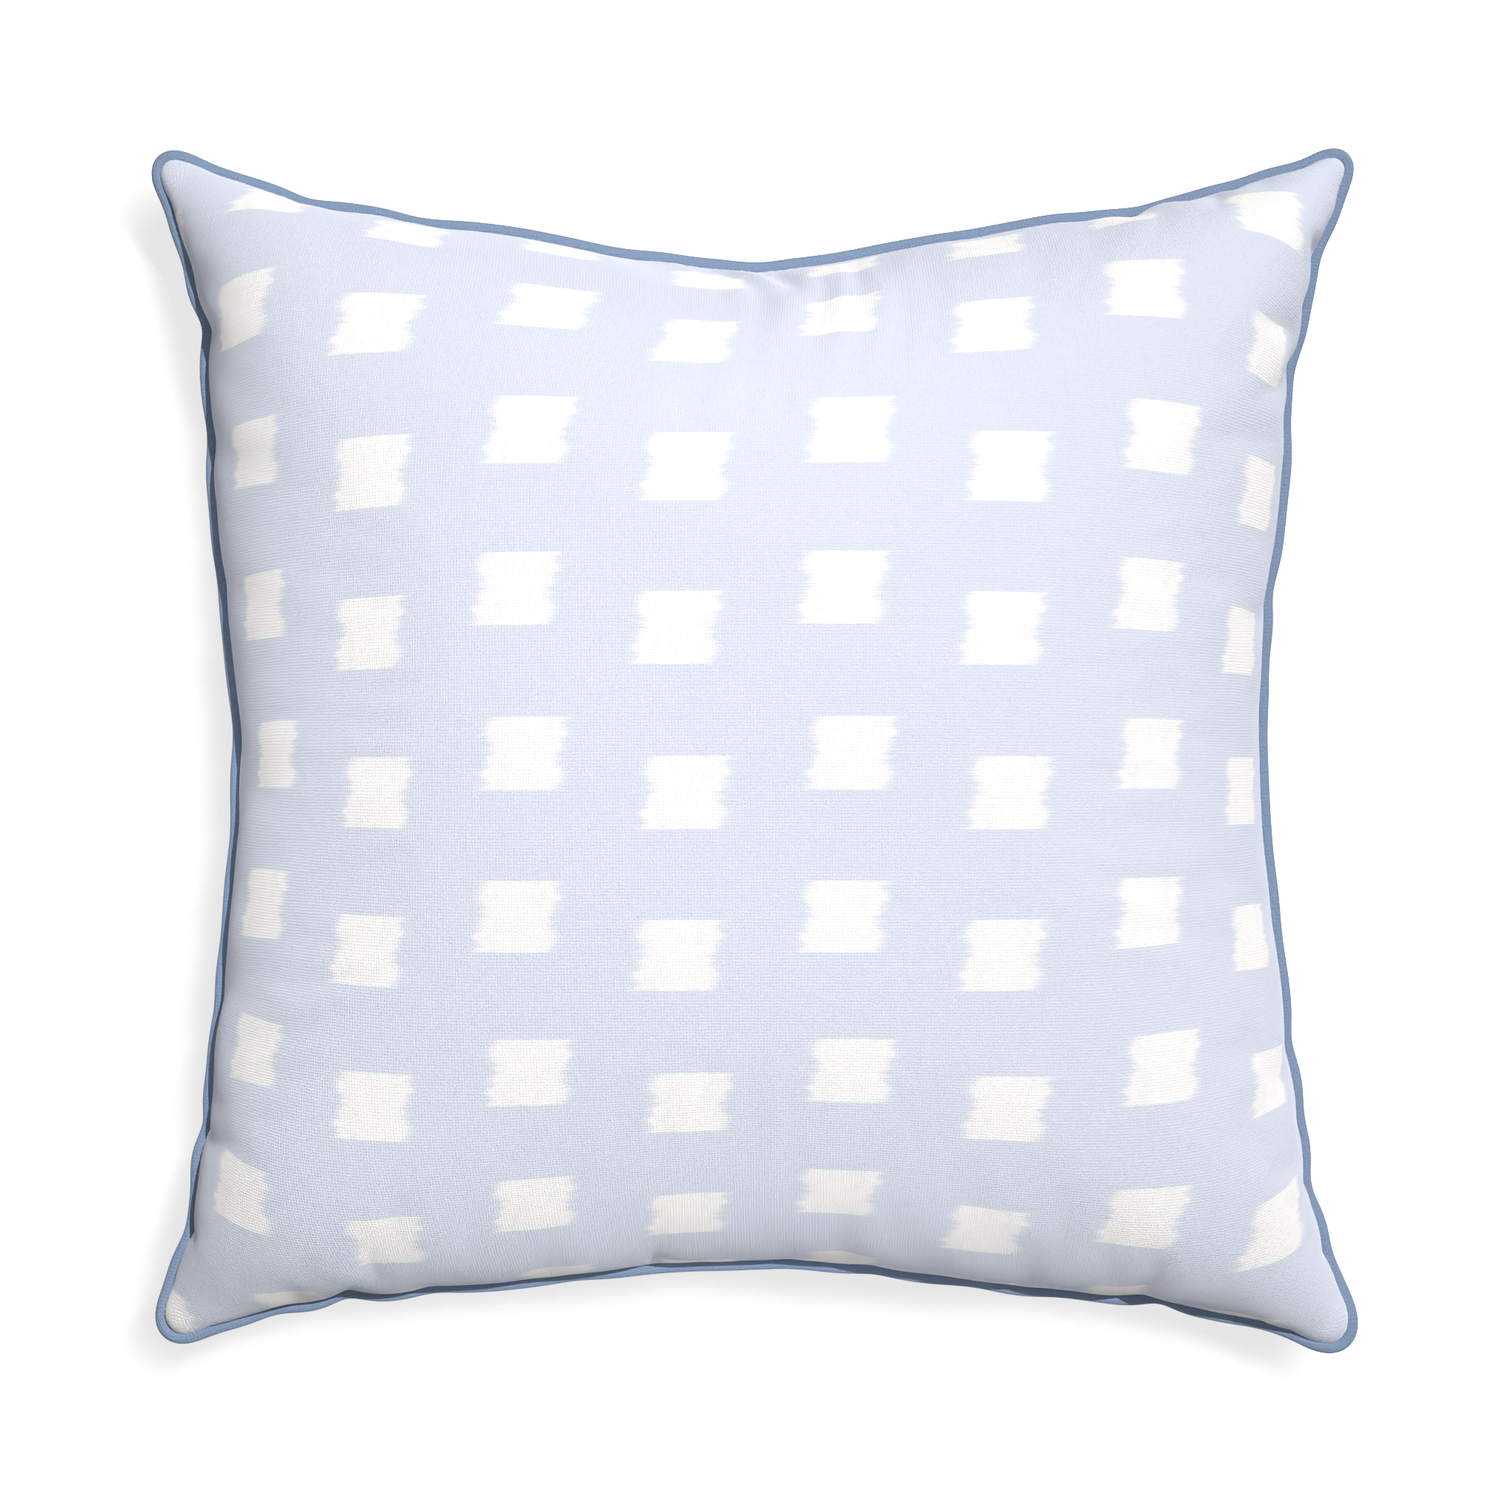 Euro-sham denton custom sky blue patternpillow with sky piping on white background